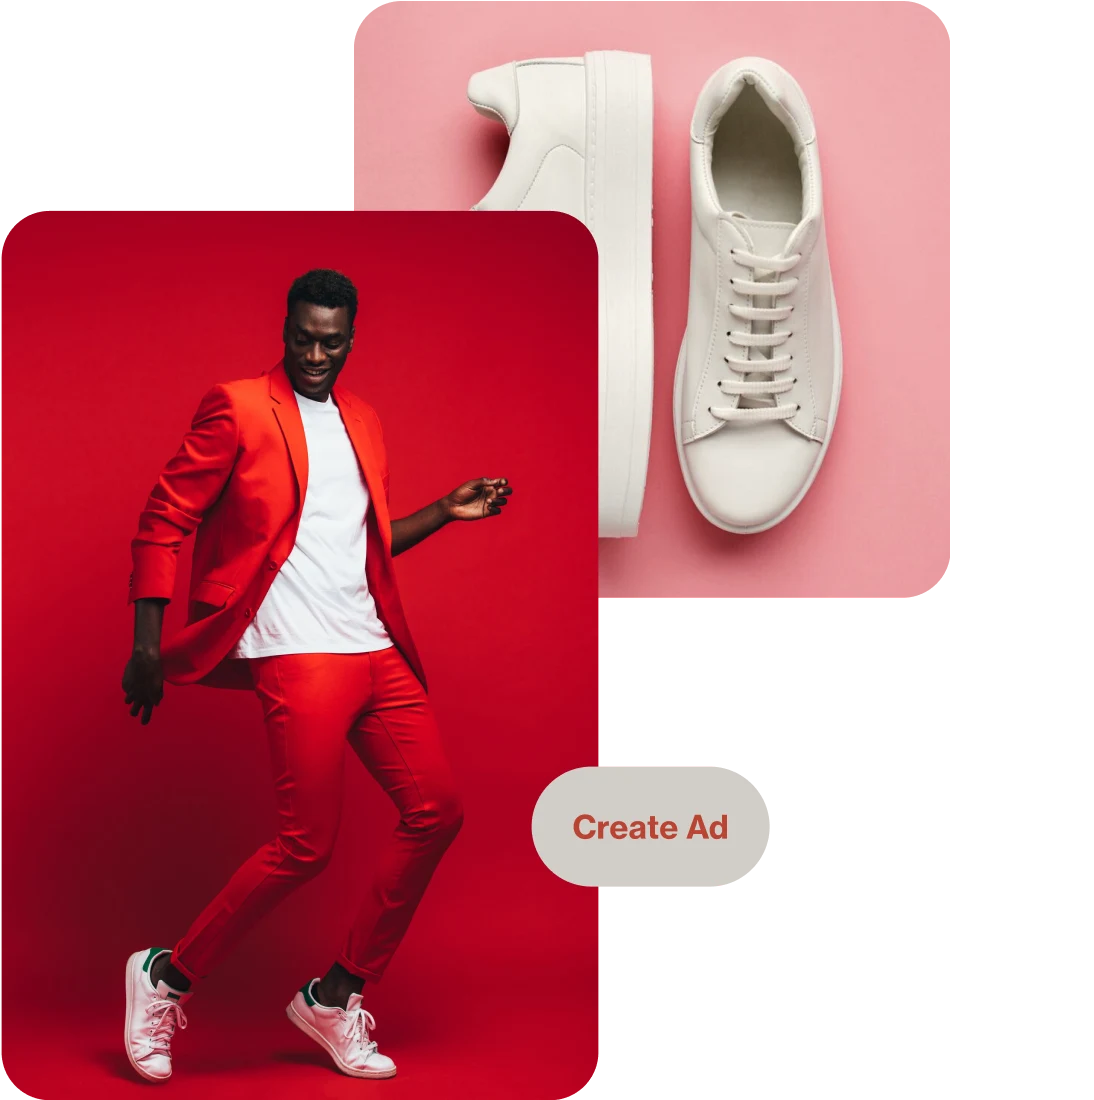 Two Pins depicting a pair of white sneakers on a pink background and a dancing Black man dressed in a red suit, white t-shirt and white sneakers on a red background